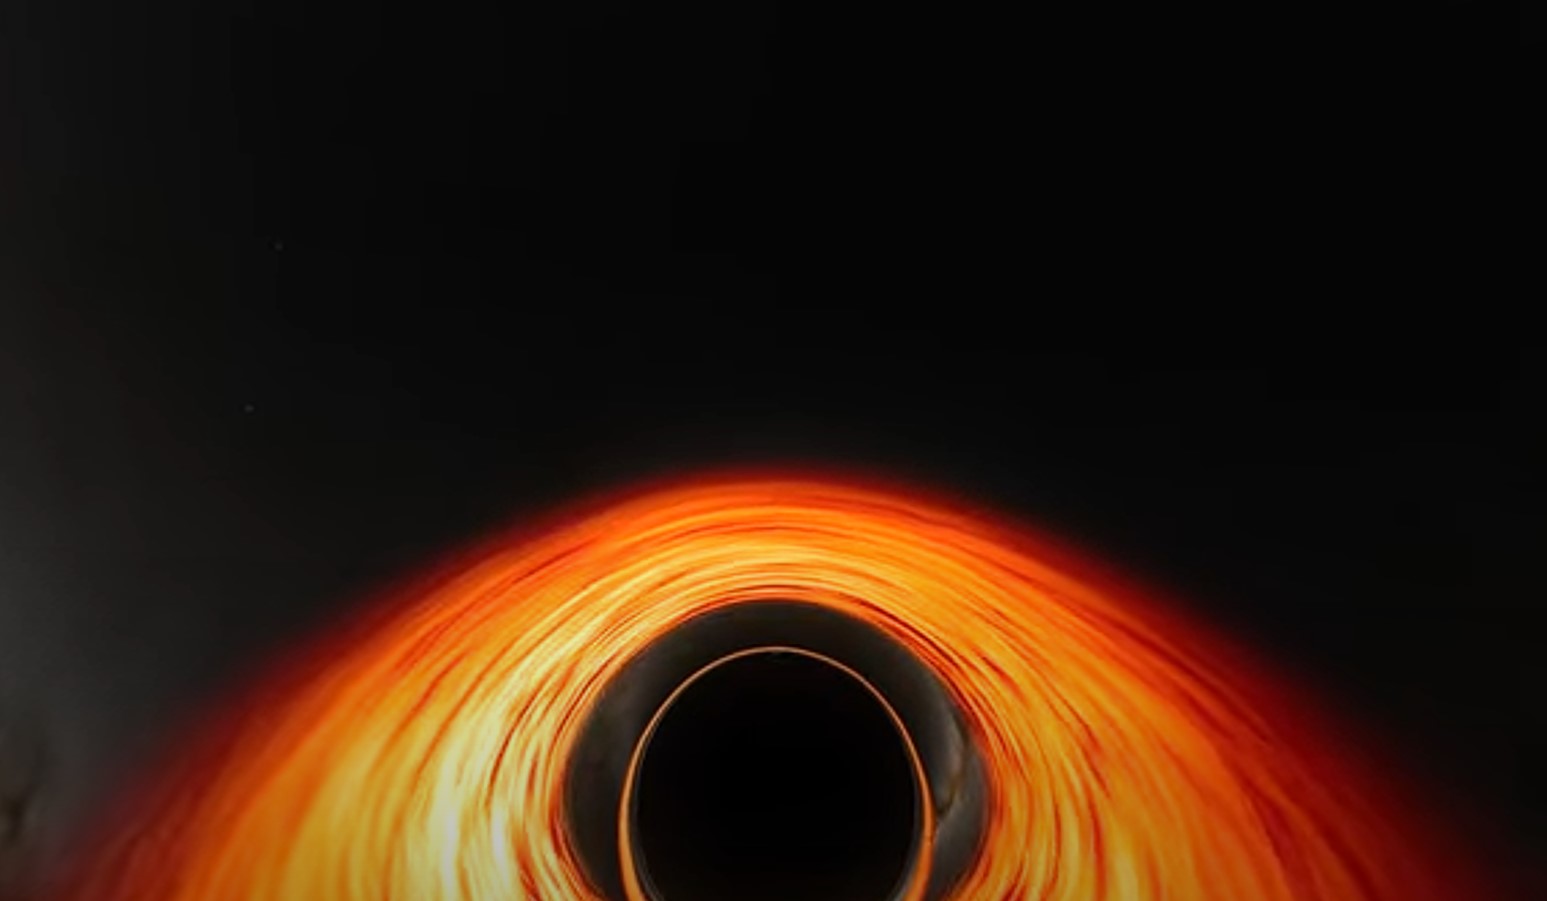 NASA: An impressive simulation shows what it would be like if we fell into a black hole